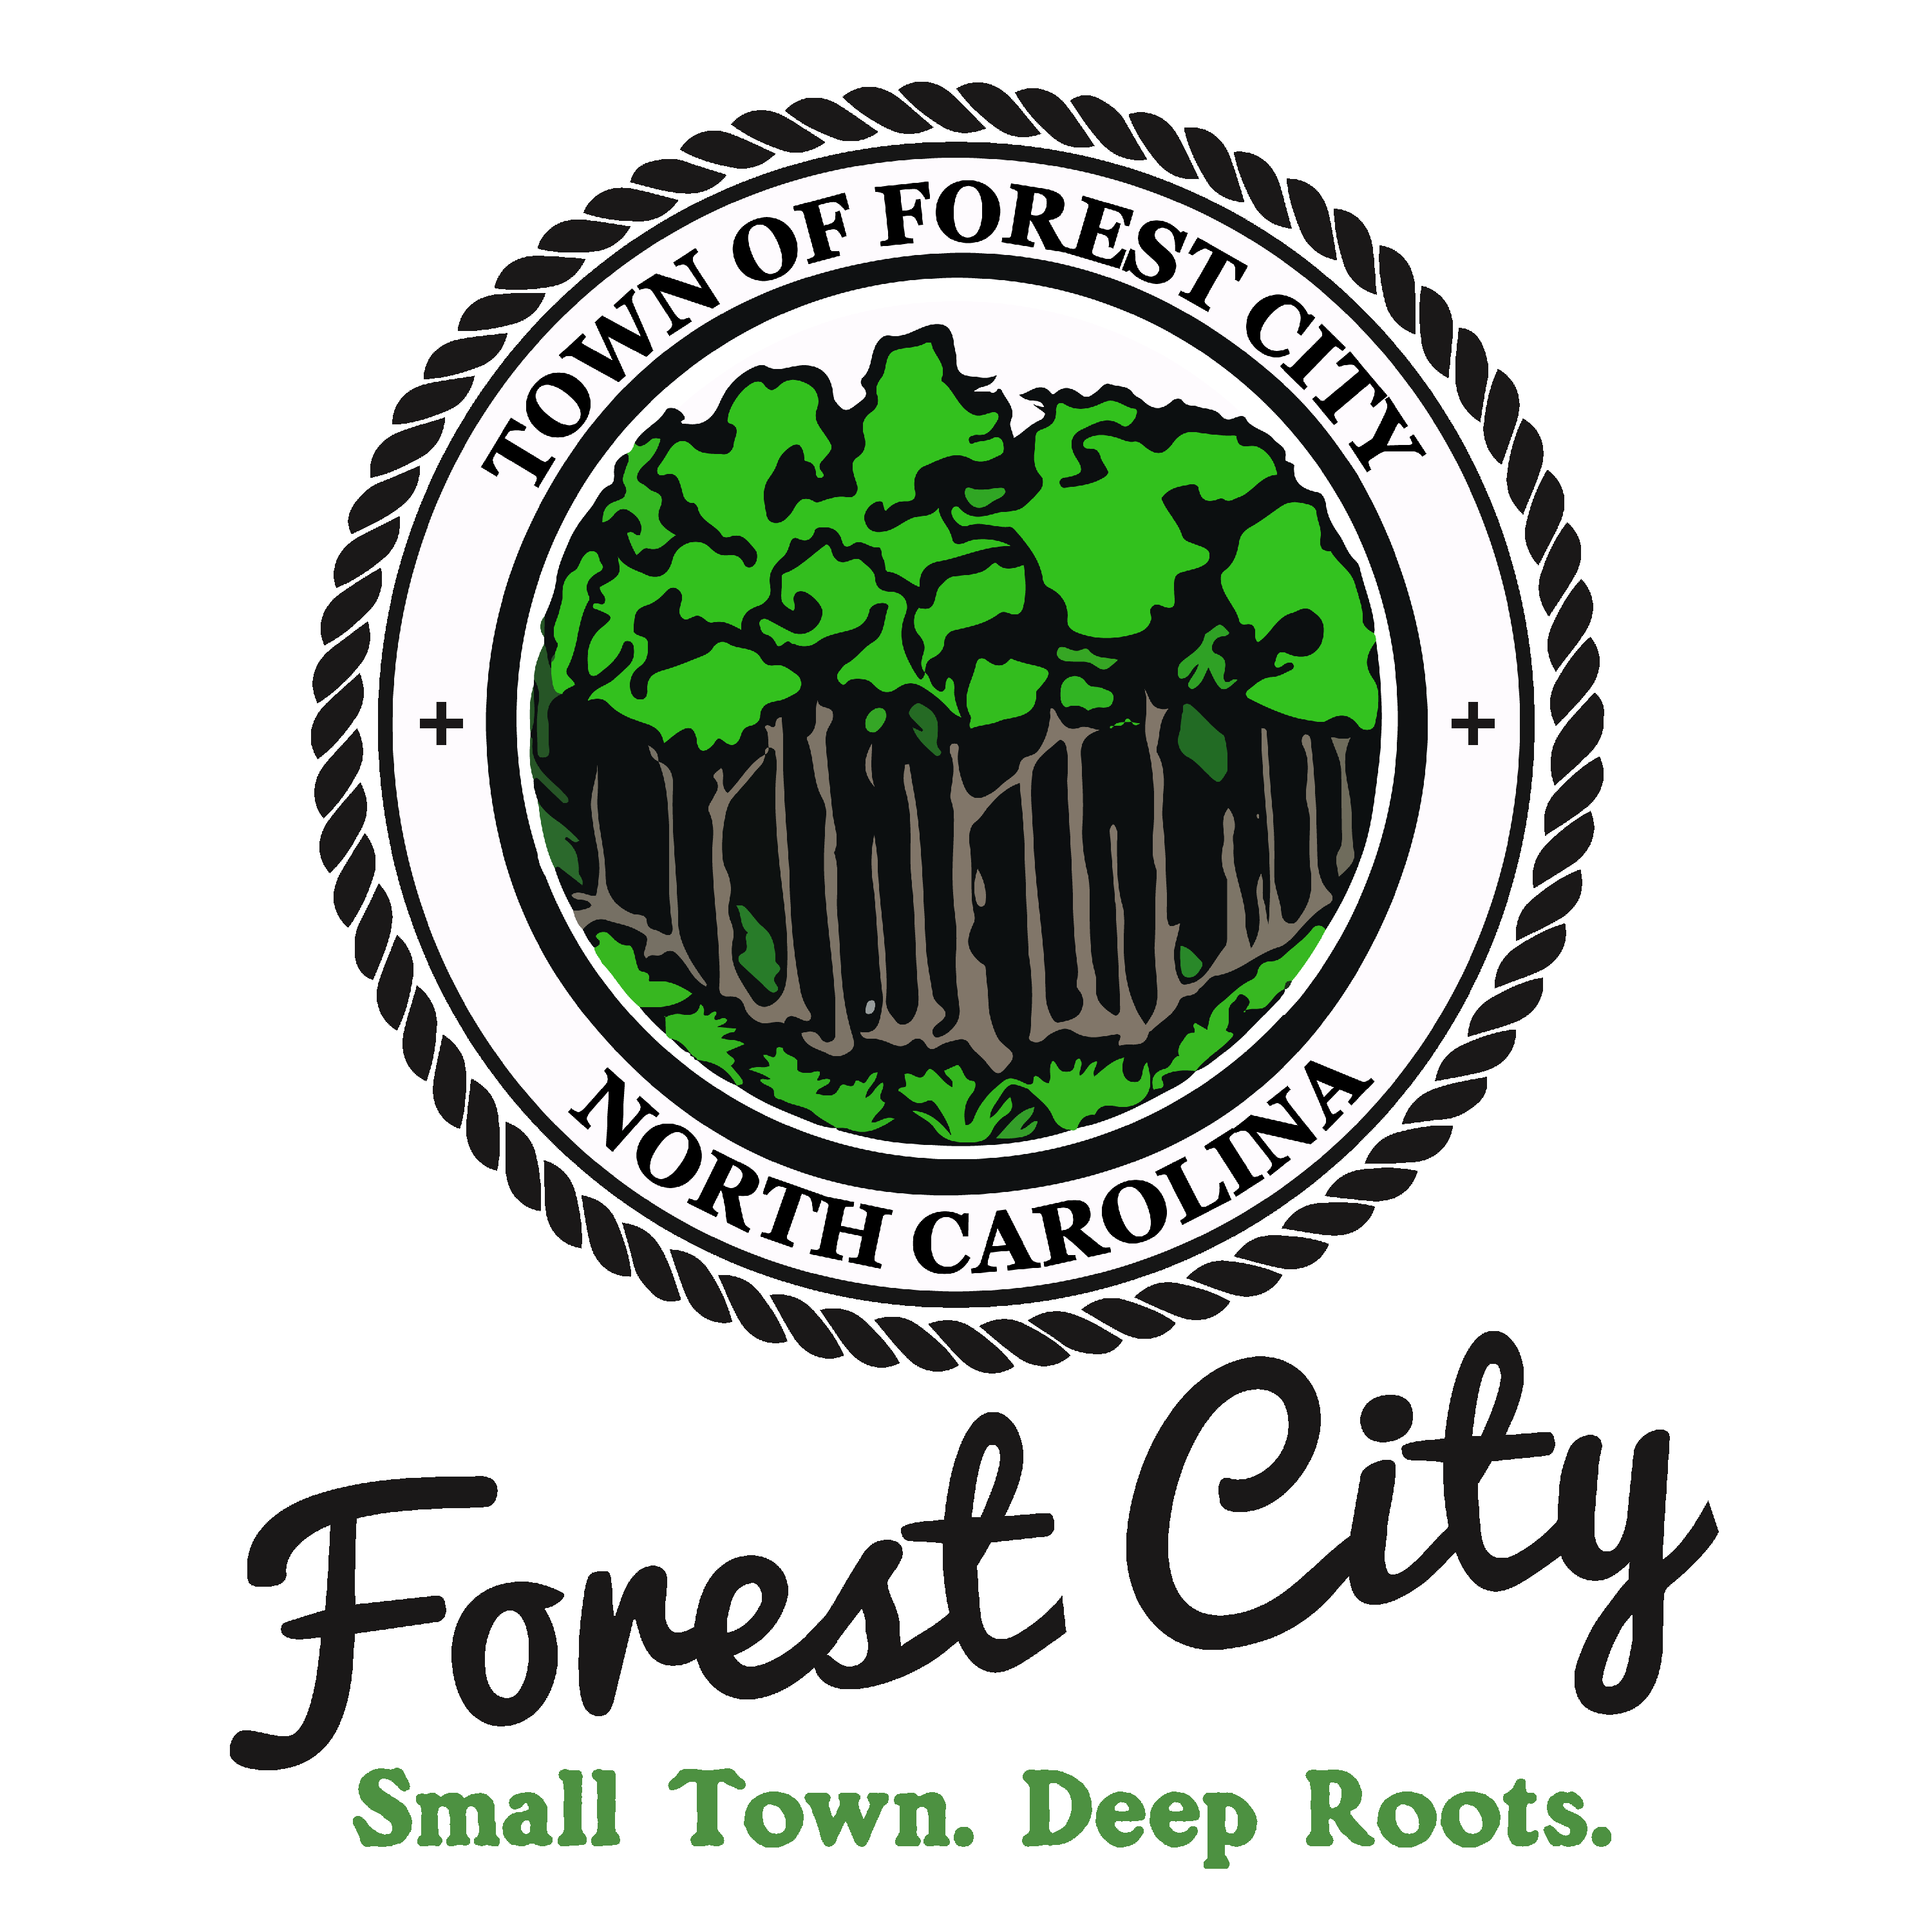 Town of Forest City